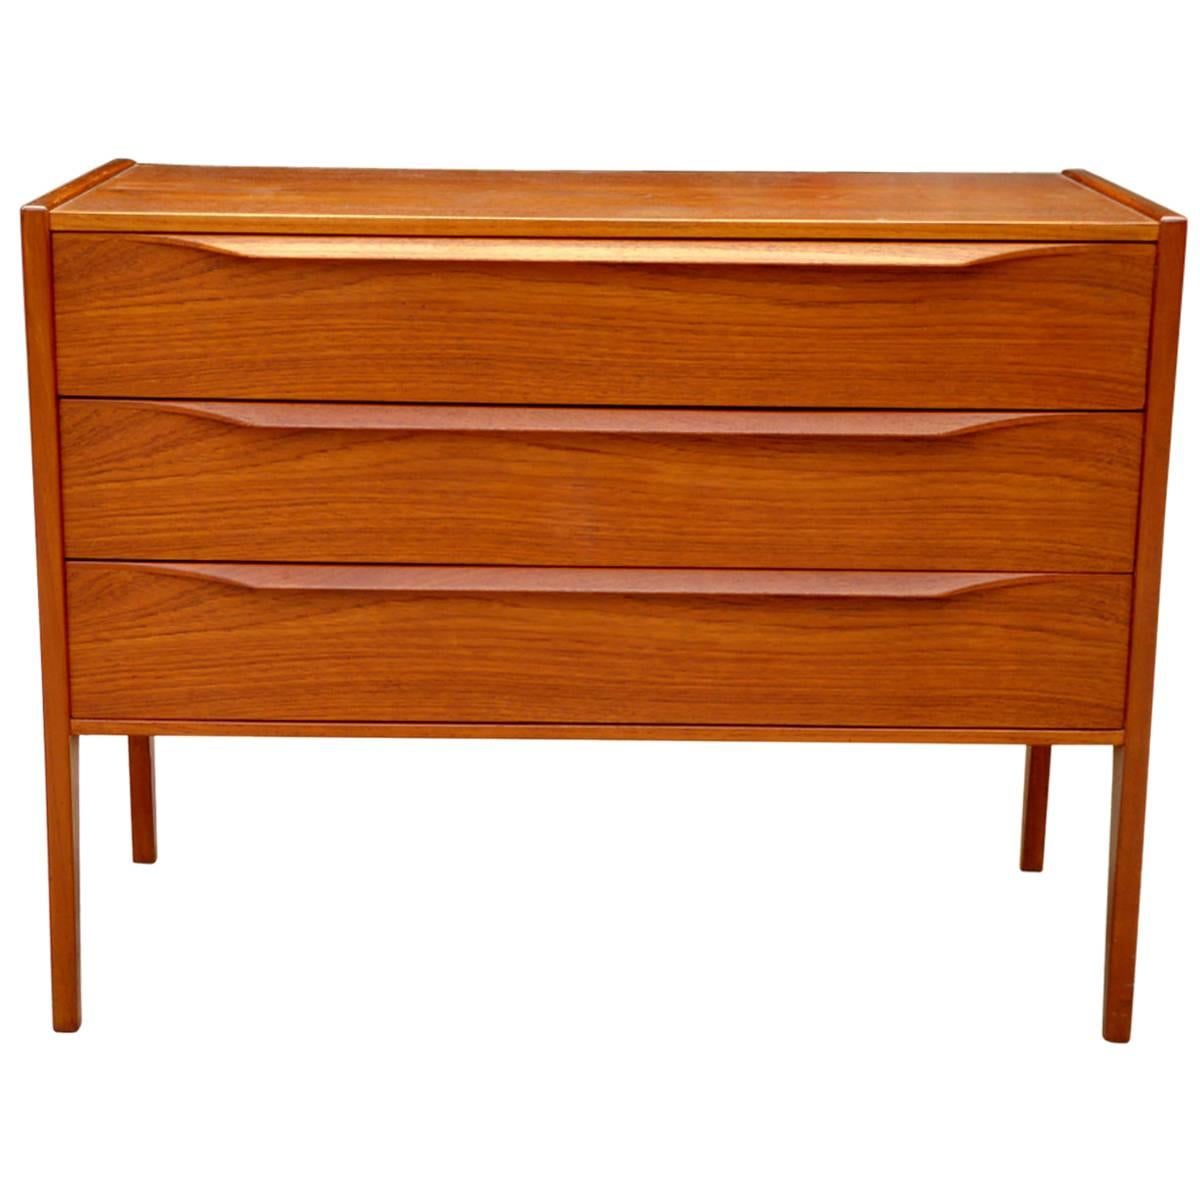 Small Teak Chest of Drawers by Aksel Kjersgaard For Sale